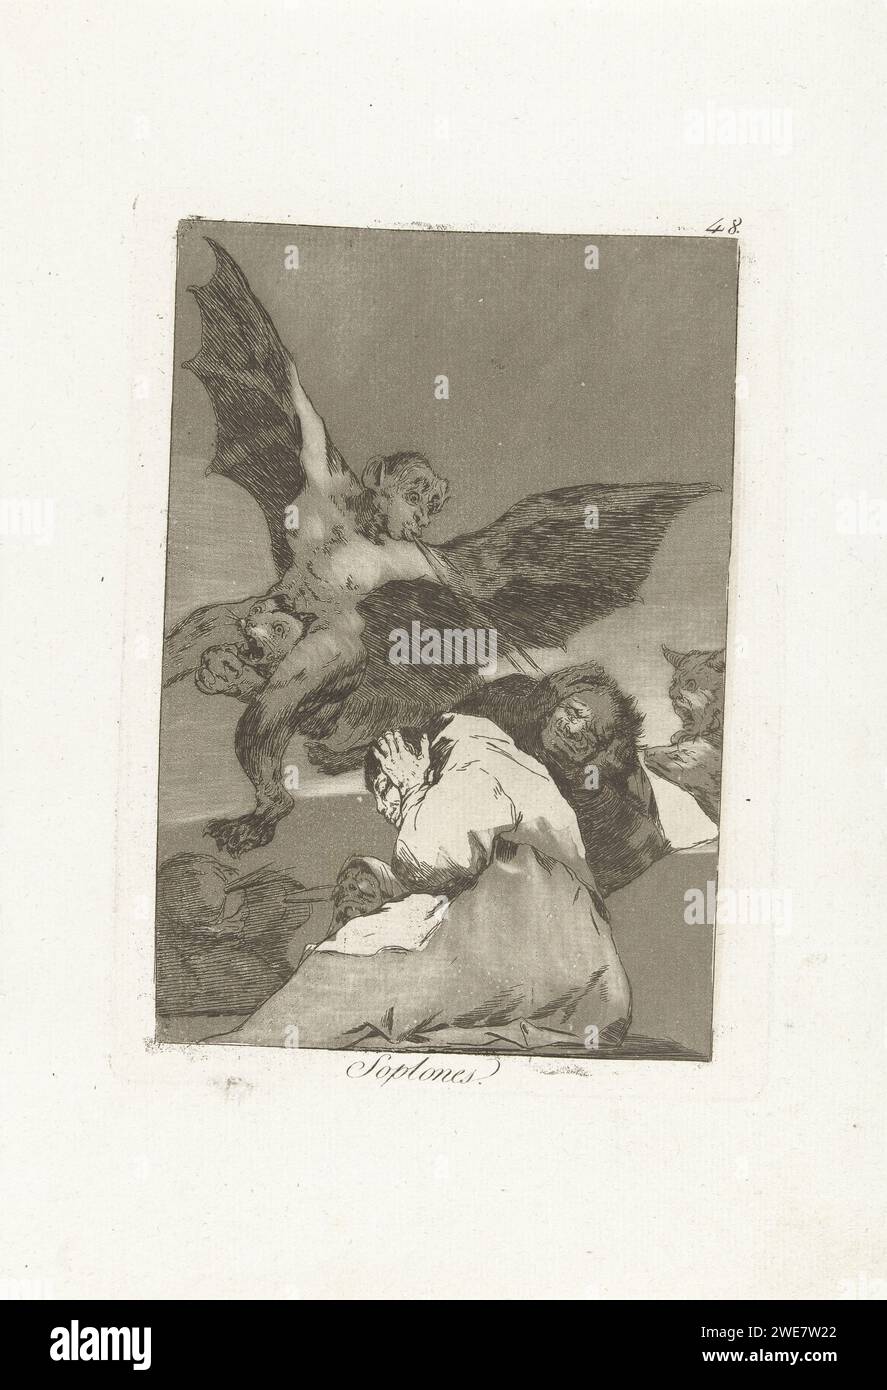 OORORBLAZERS, FRANCISCO DE GOYA, 1797 - 1799 print A devilish figure with wings blows to three monks. These cover their ears. Forty -eight prints in the Los Caprichos series. Spain paper etching devil(s) and demons. monk(s), friar(s) Stock Photo